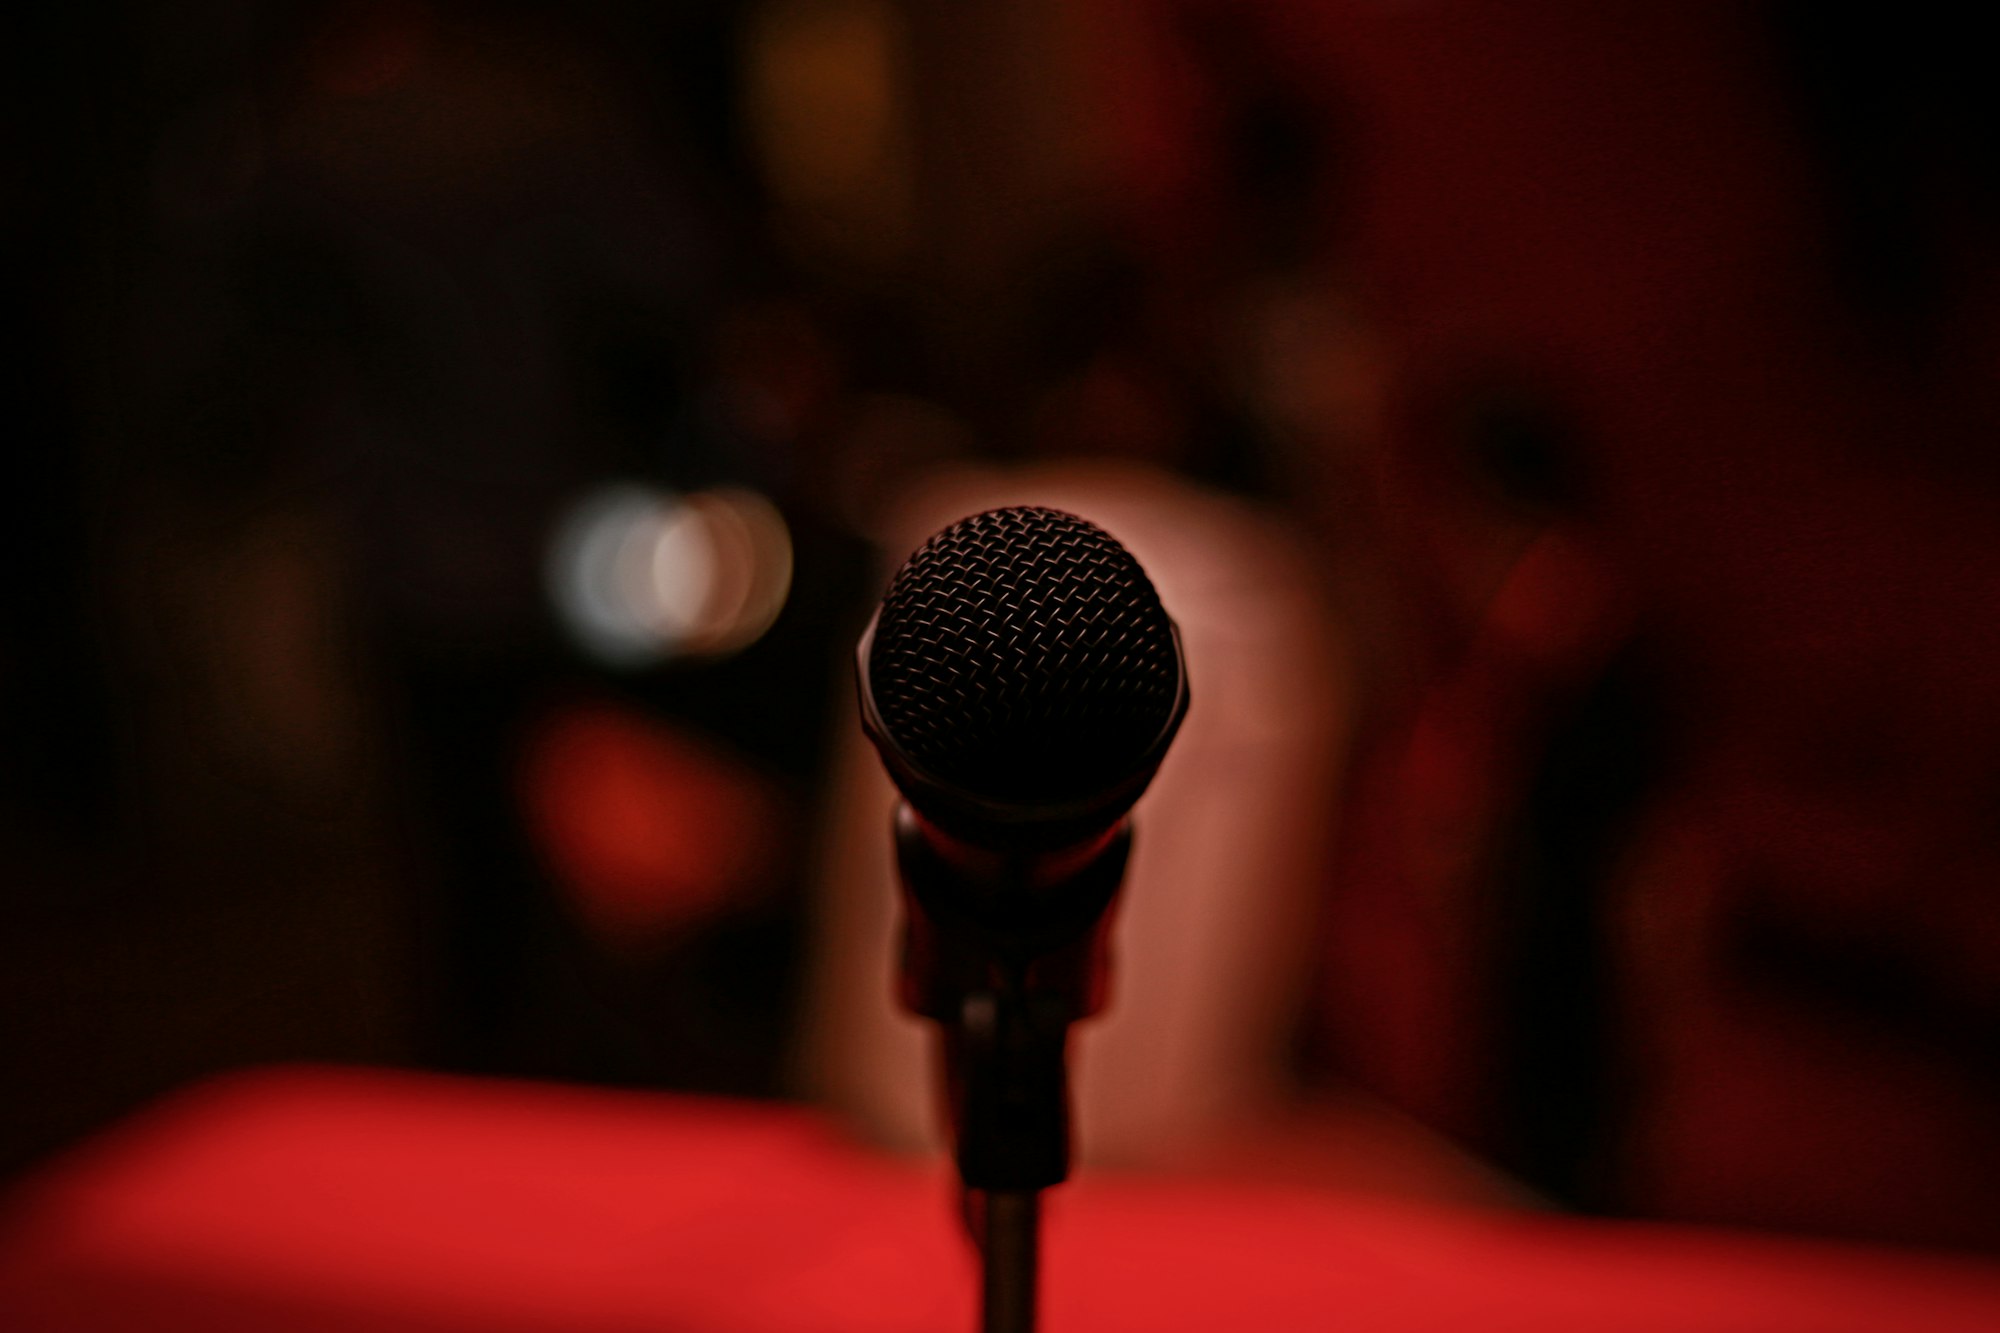 Speaking at Tech Events: What I've Learned About Overcoming Anxiety & Public Speaking